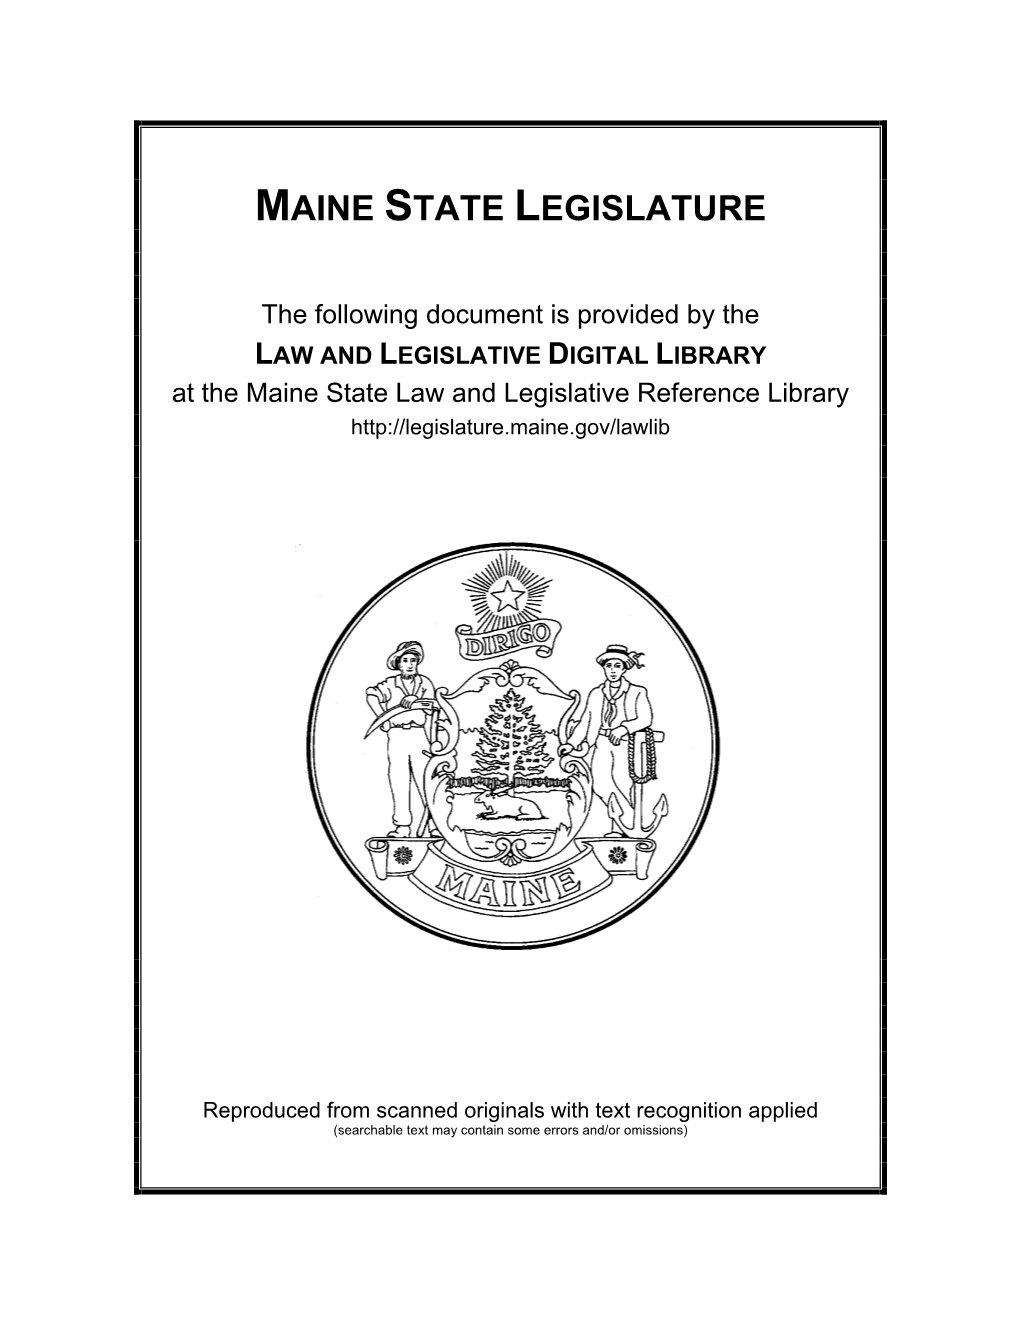 Maine Energy Council to Extend Reporting Date from Decision January 15,2007 to March 15,2007